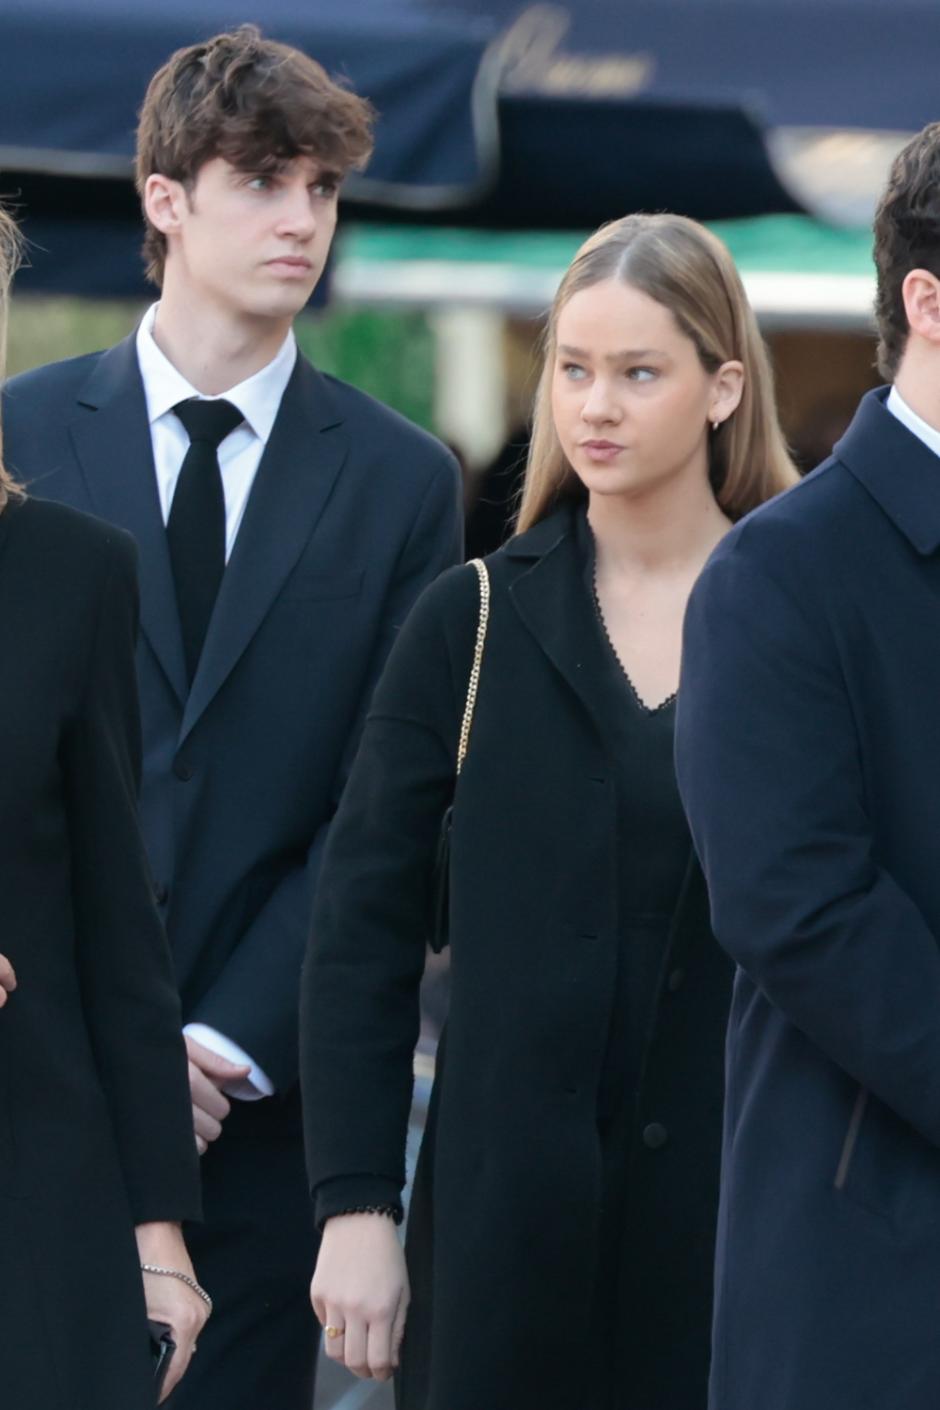 Irene and Pablo Nicolas Urdangarin during burial of Constantine of Greece in Athens, on Monday,, 16 January 2023.